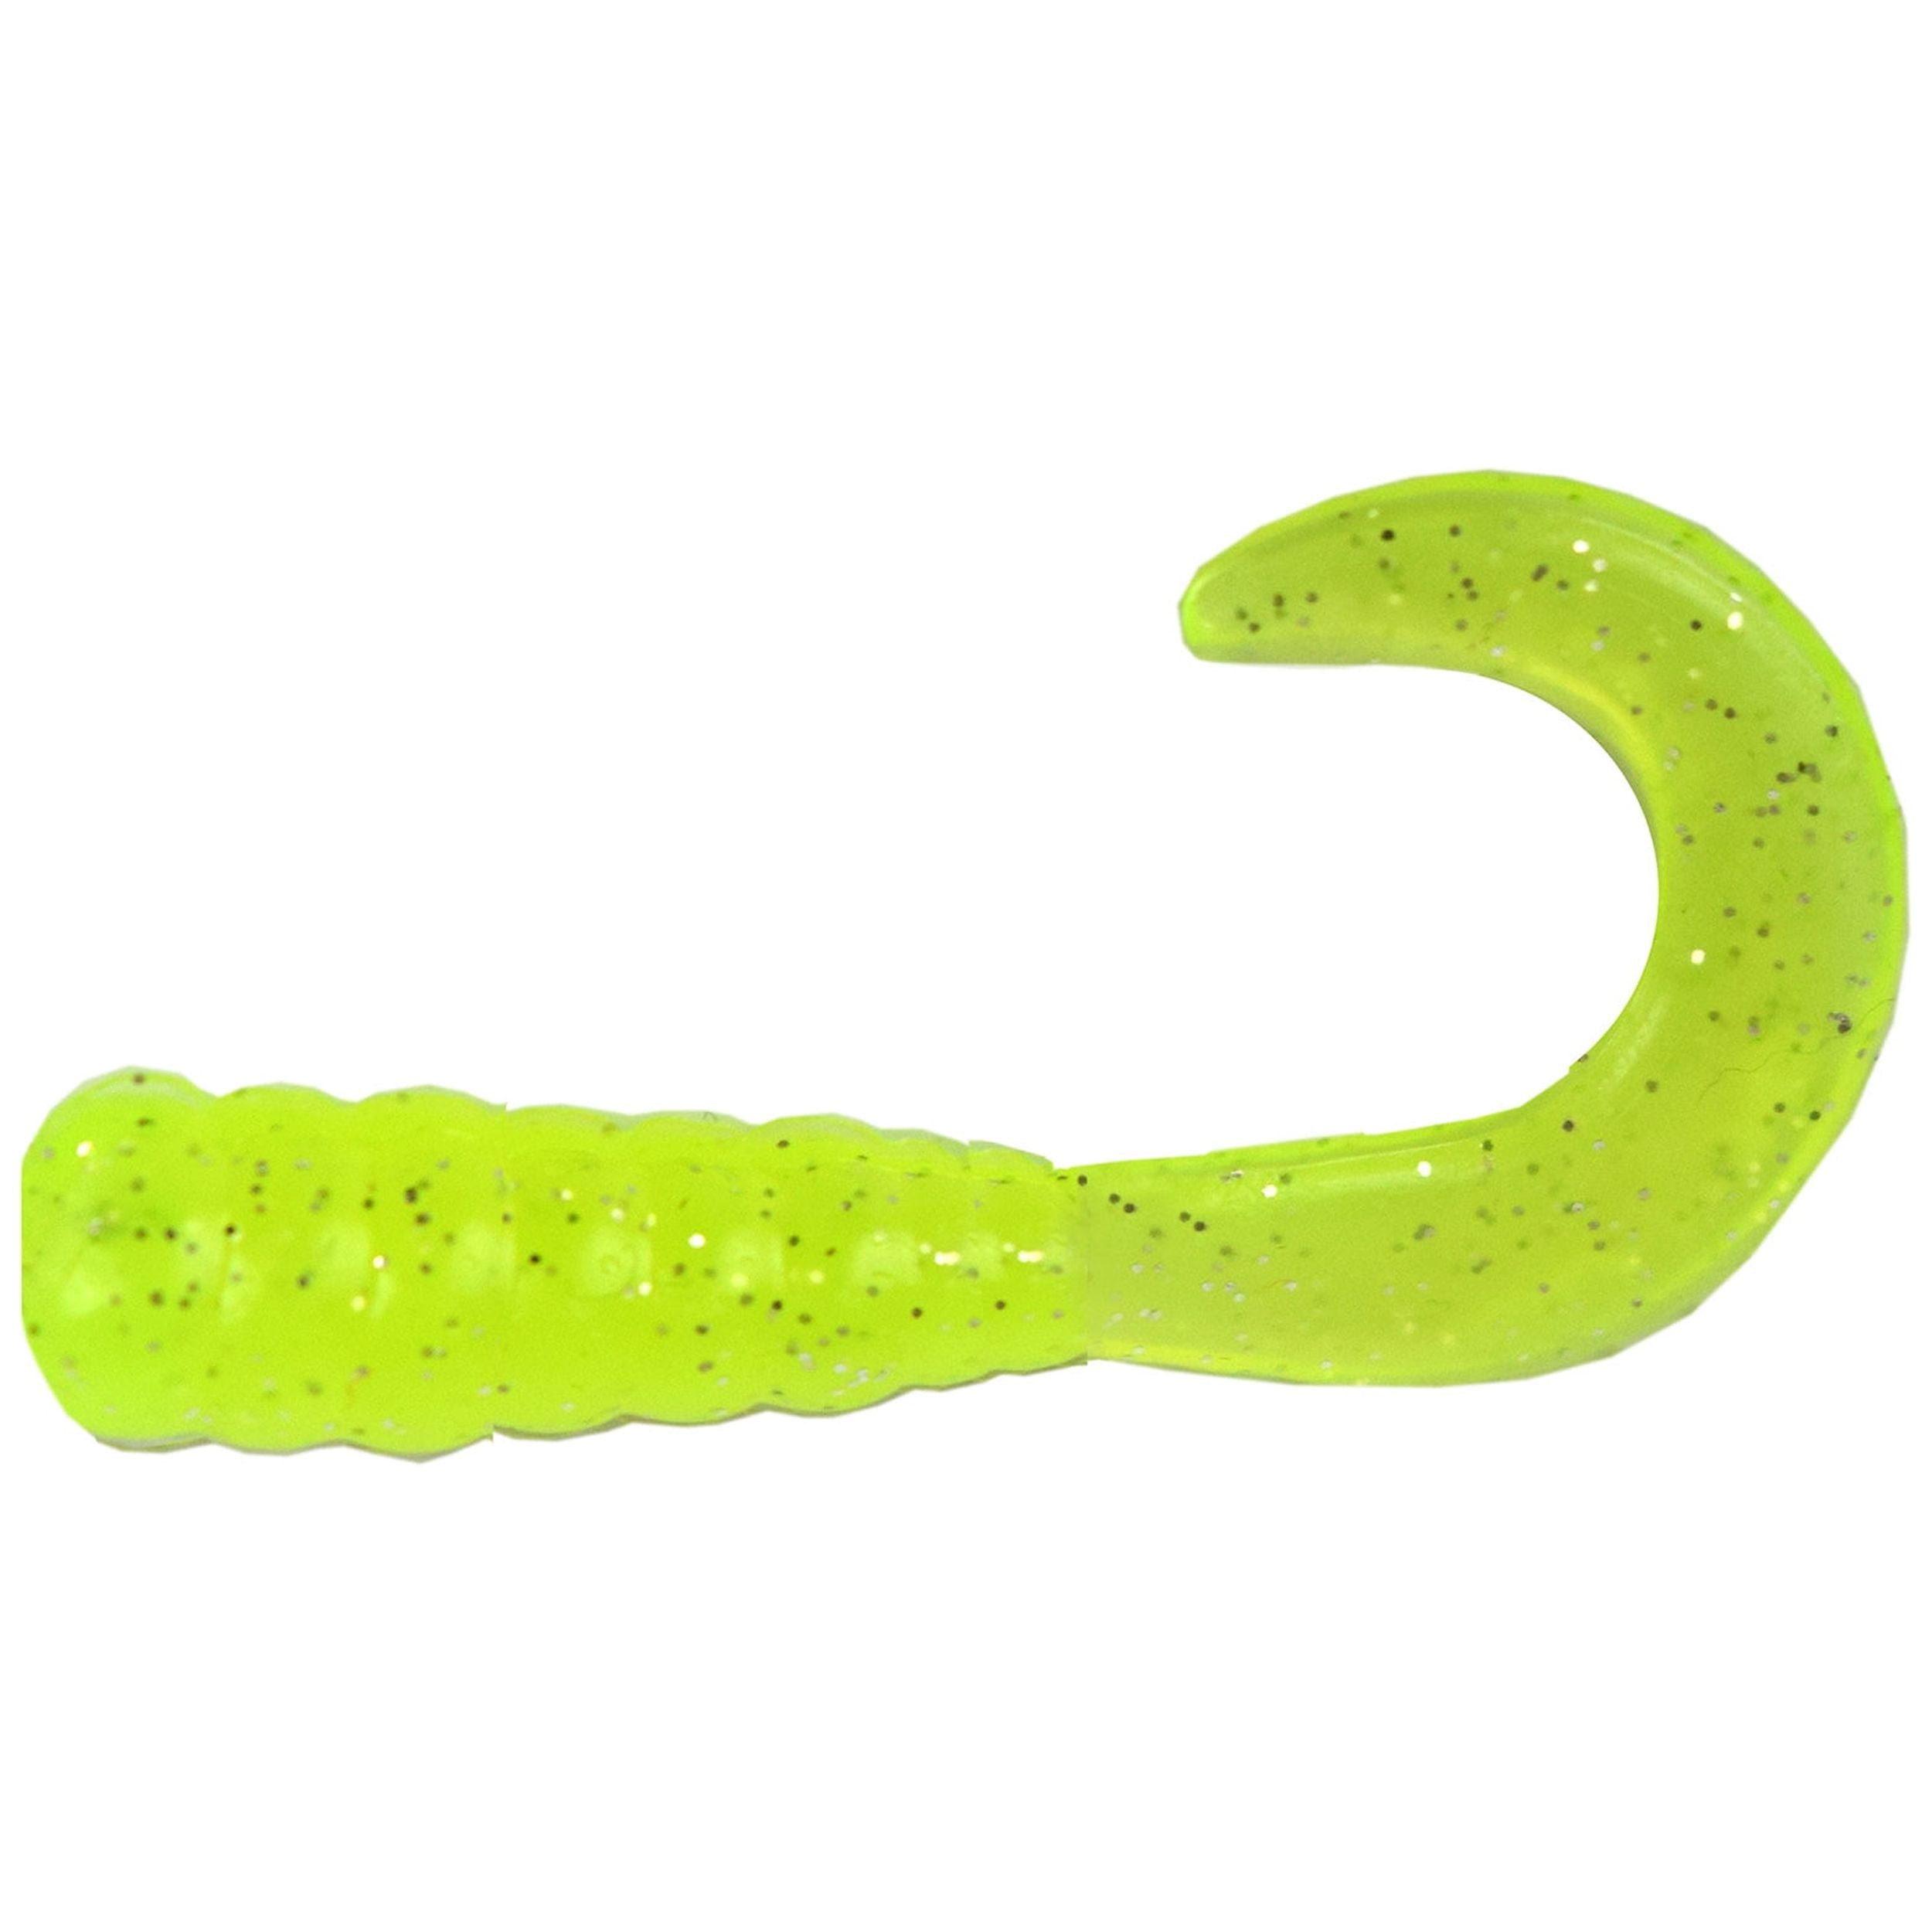 Tackle HD 40-Pack Grub Fishing Lures, 2-Inch Skirted Grub with Curly Tail,  Bulk Fishing Grubs for Crappie, Bass, Walleye, or Trout Bait, Freshwater or